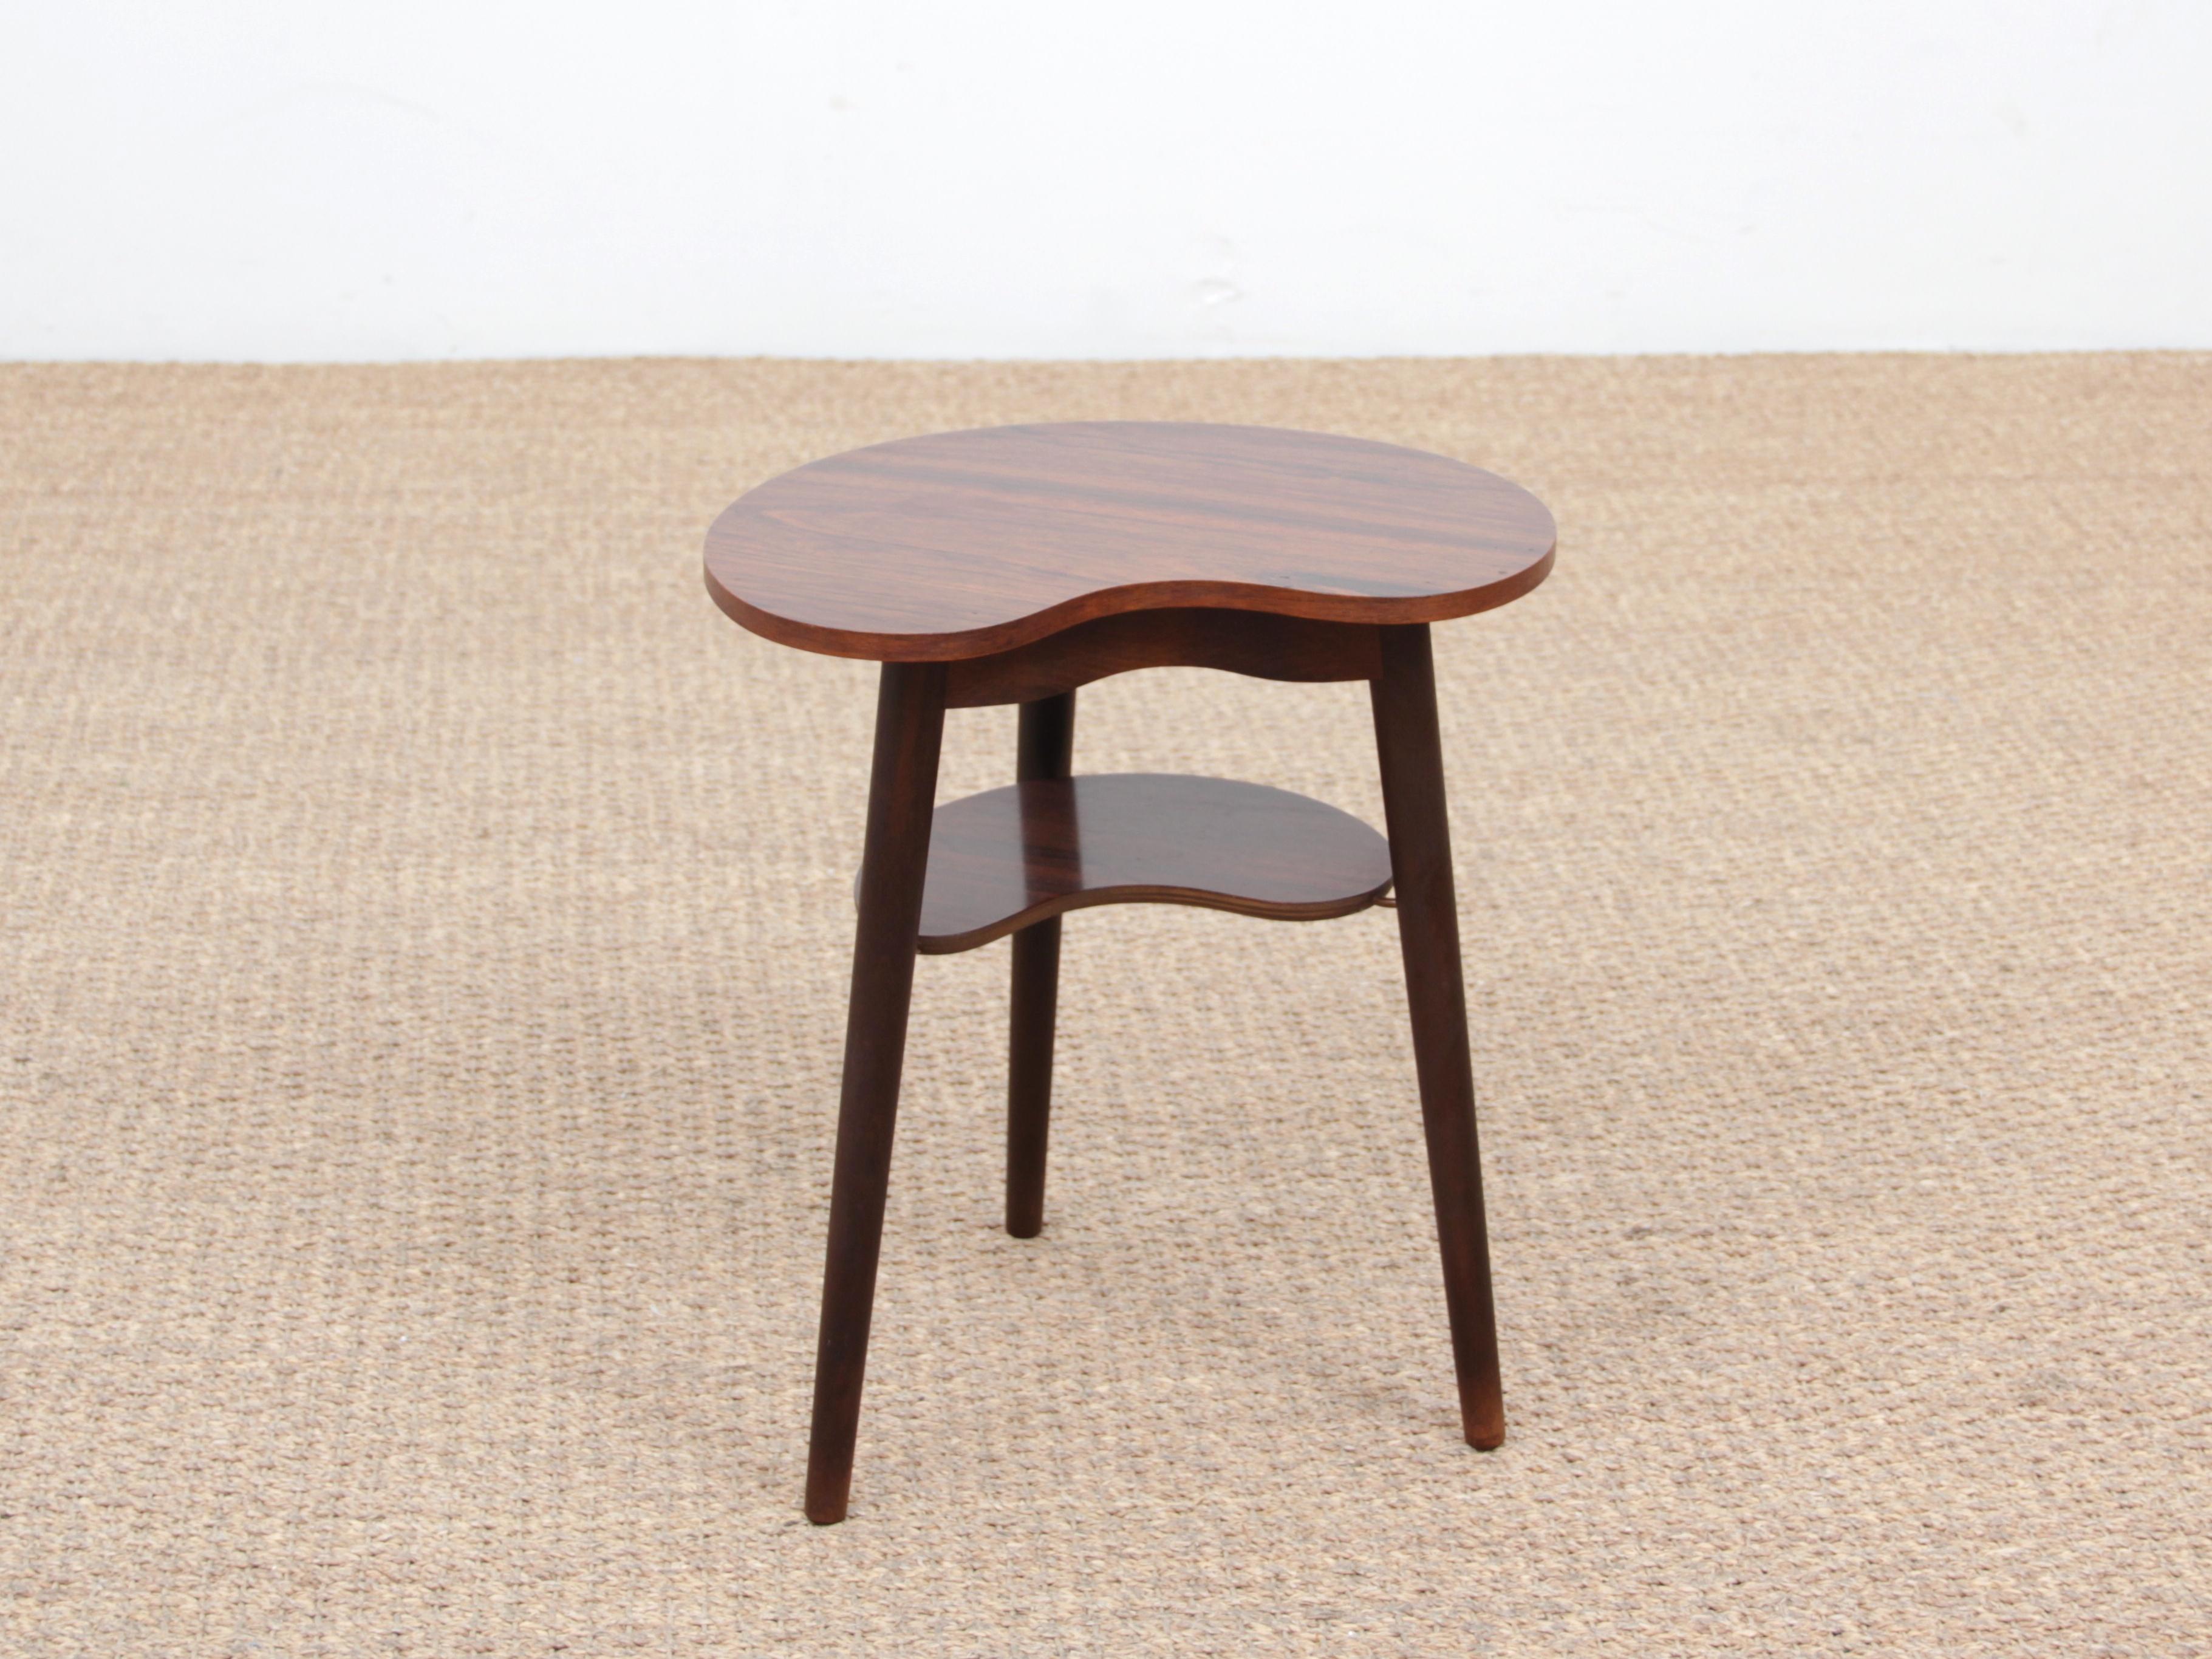 Mid-Century Modern Scandinavian occasional table in rosewood. Small hidden drawer.